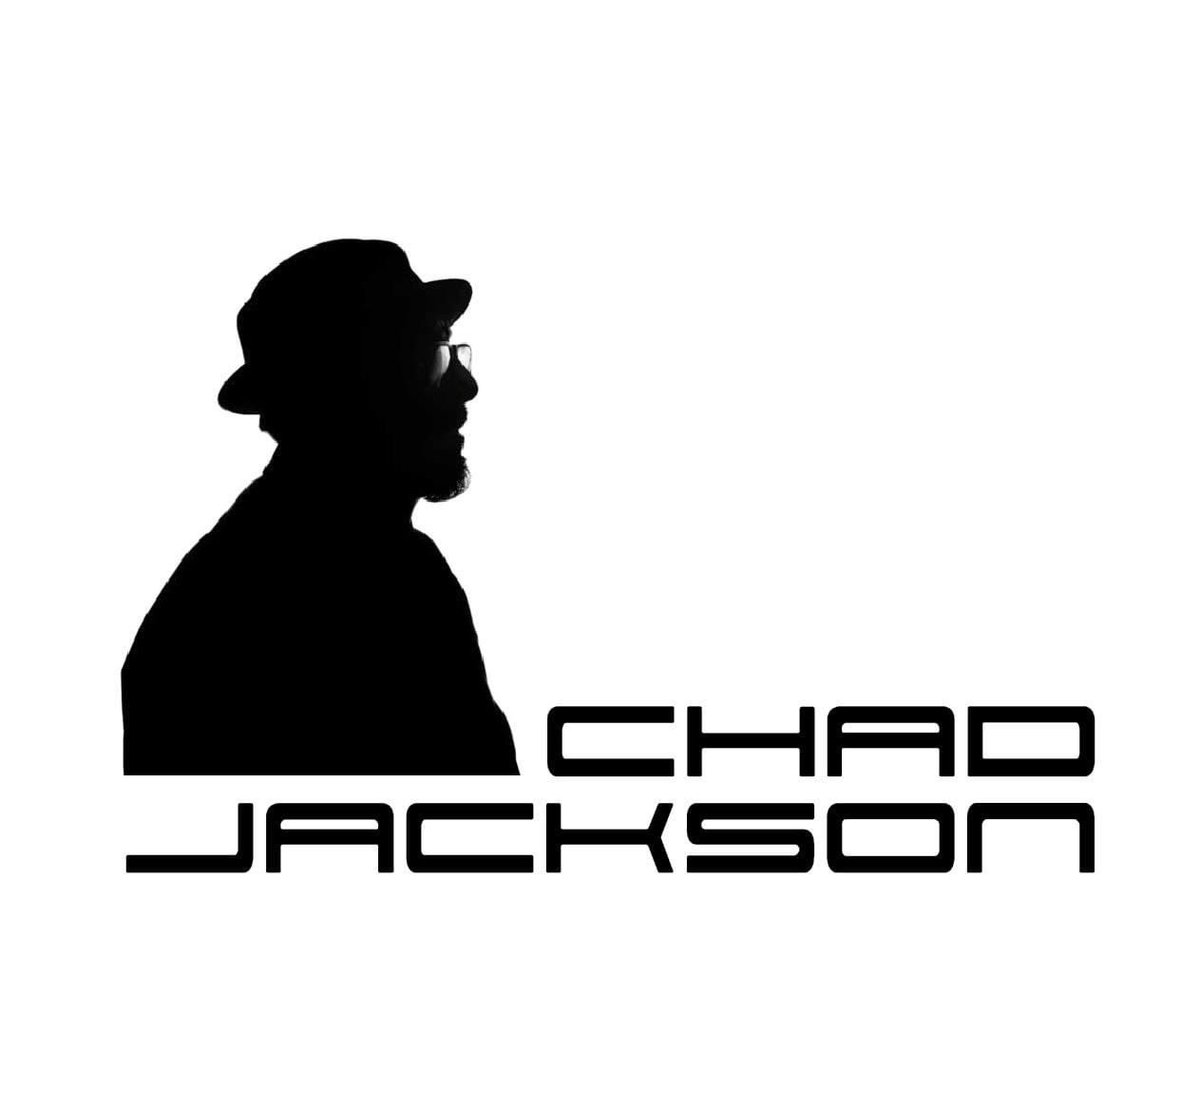 My latest radio show from last week - Soundcloud and Mixcloud (High Fidelity Version) links below: soundcloud.com/chad-jackson/j… mixcloud.com/ChadJackson/jo… I do hope you enjoy the journey. xx